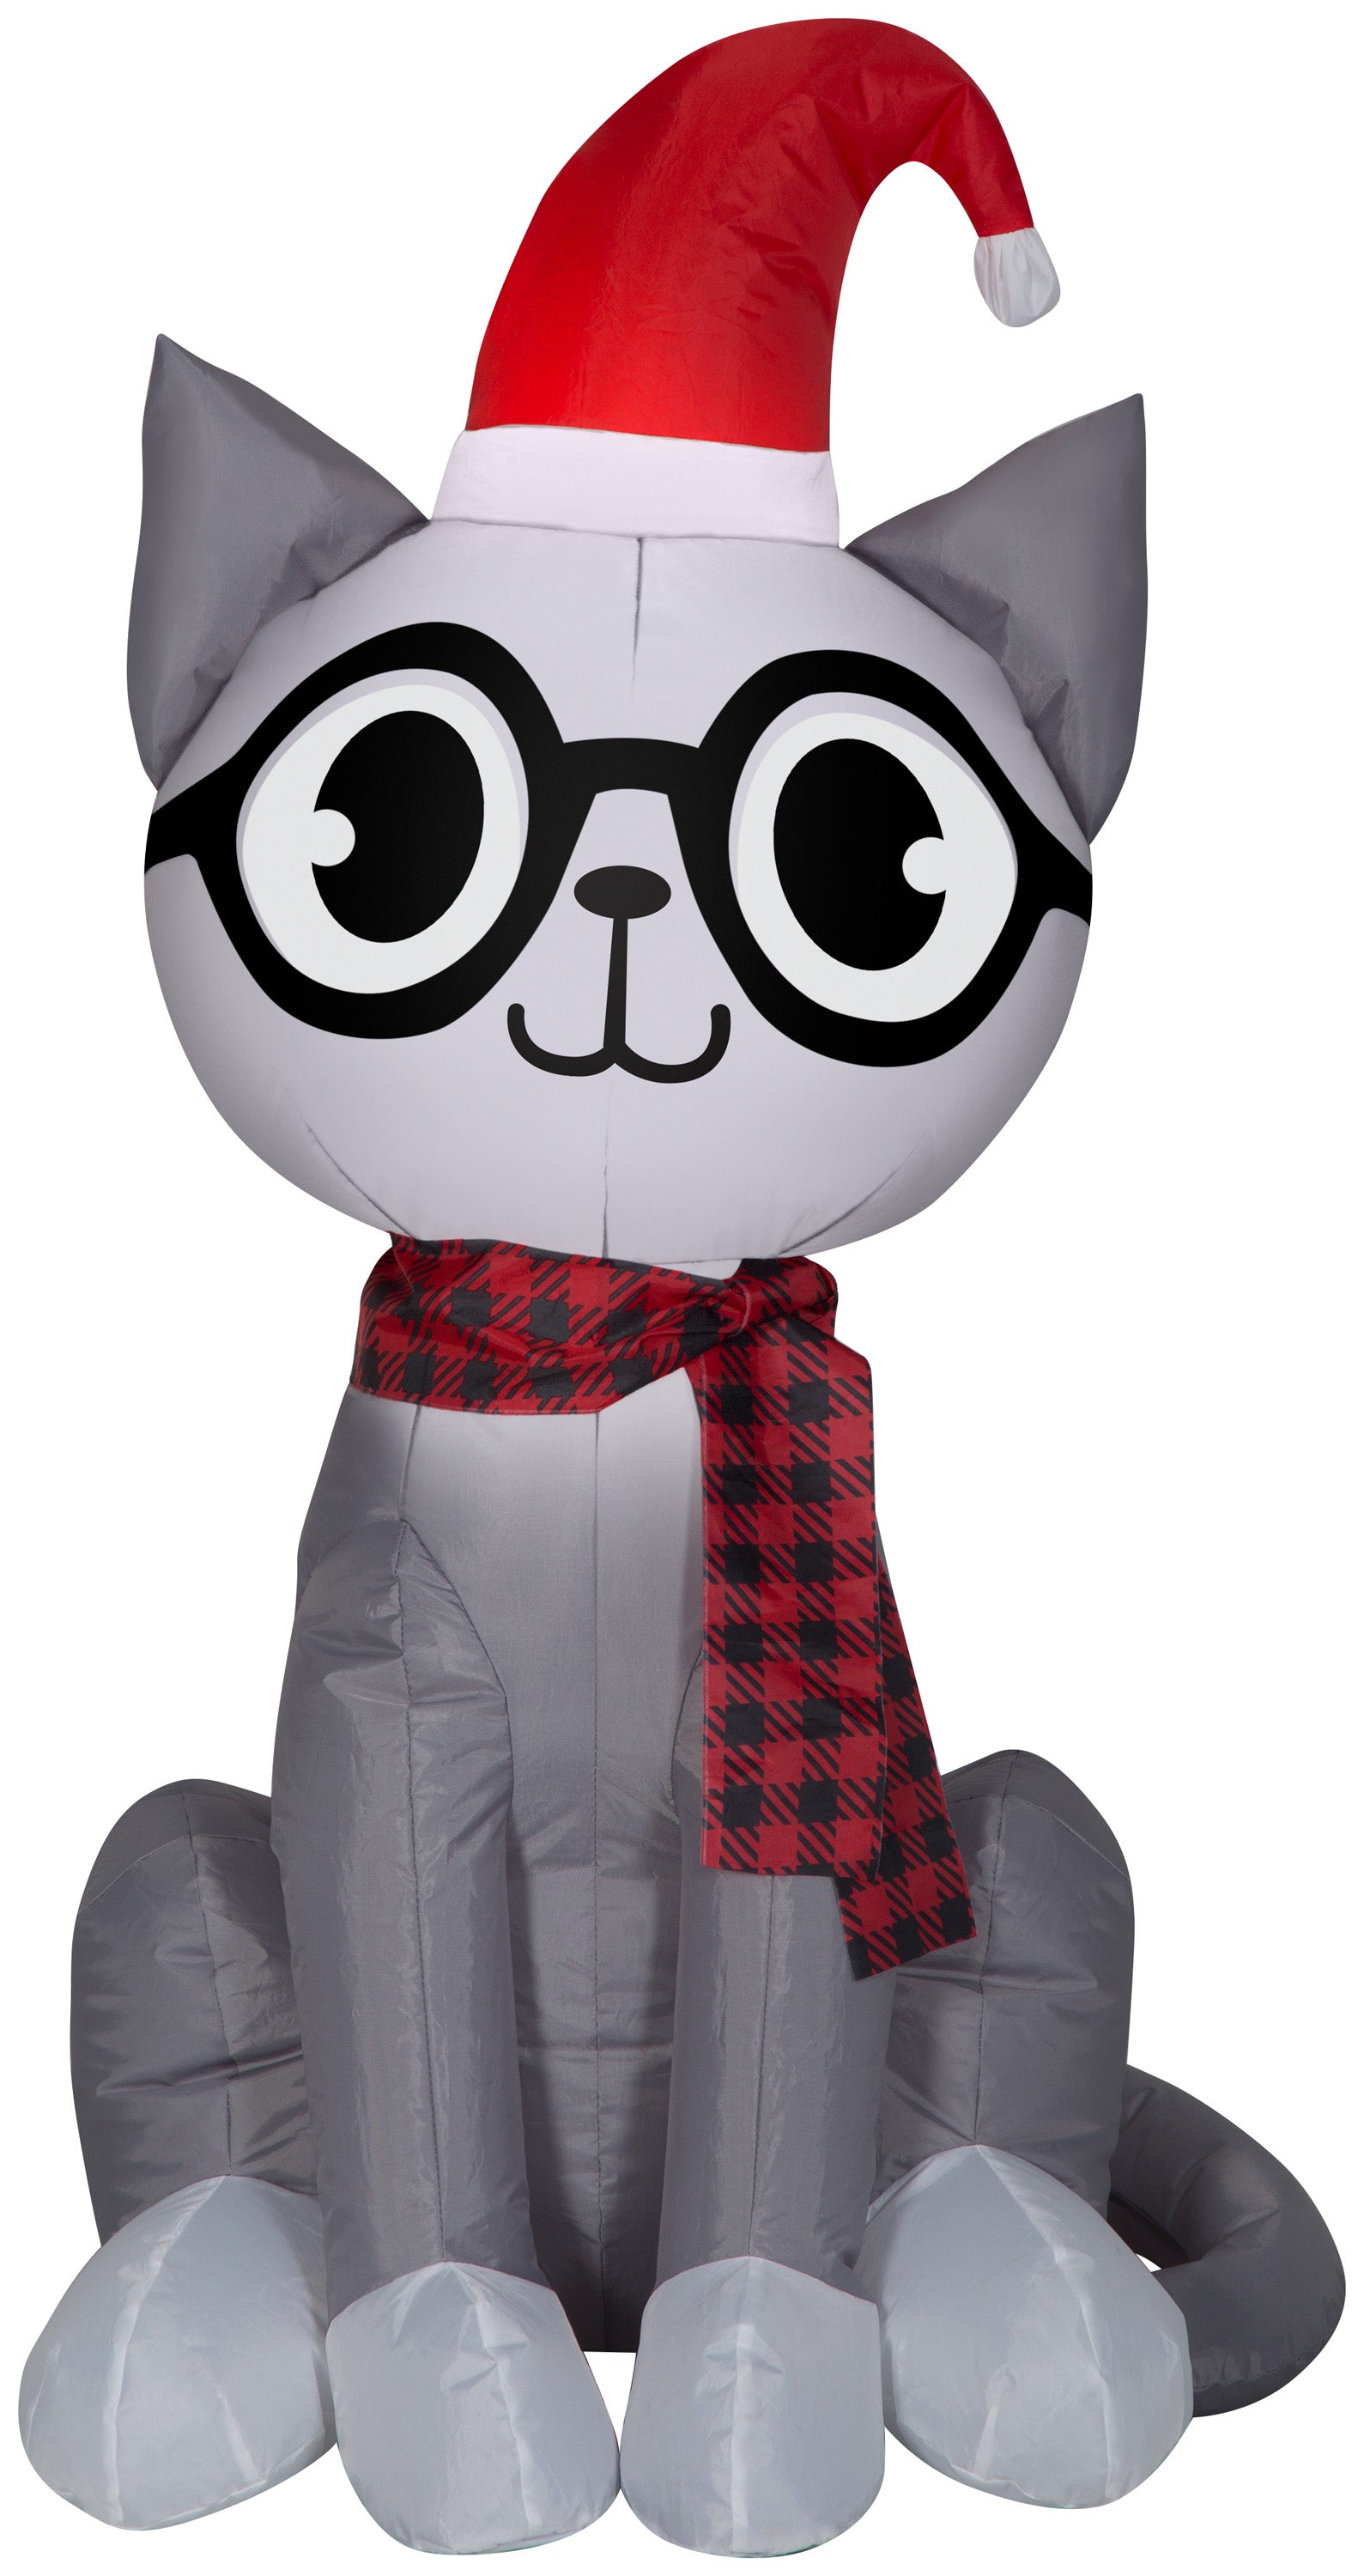 Gemmy Christmas Airblown Inflatable Nerdy Cat, 3.5 ft Tall, grey